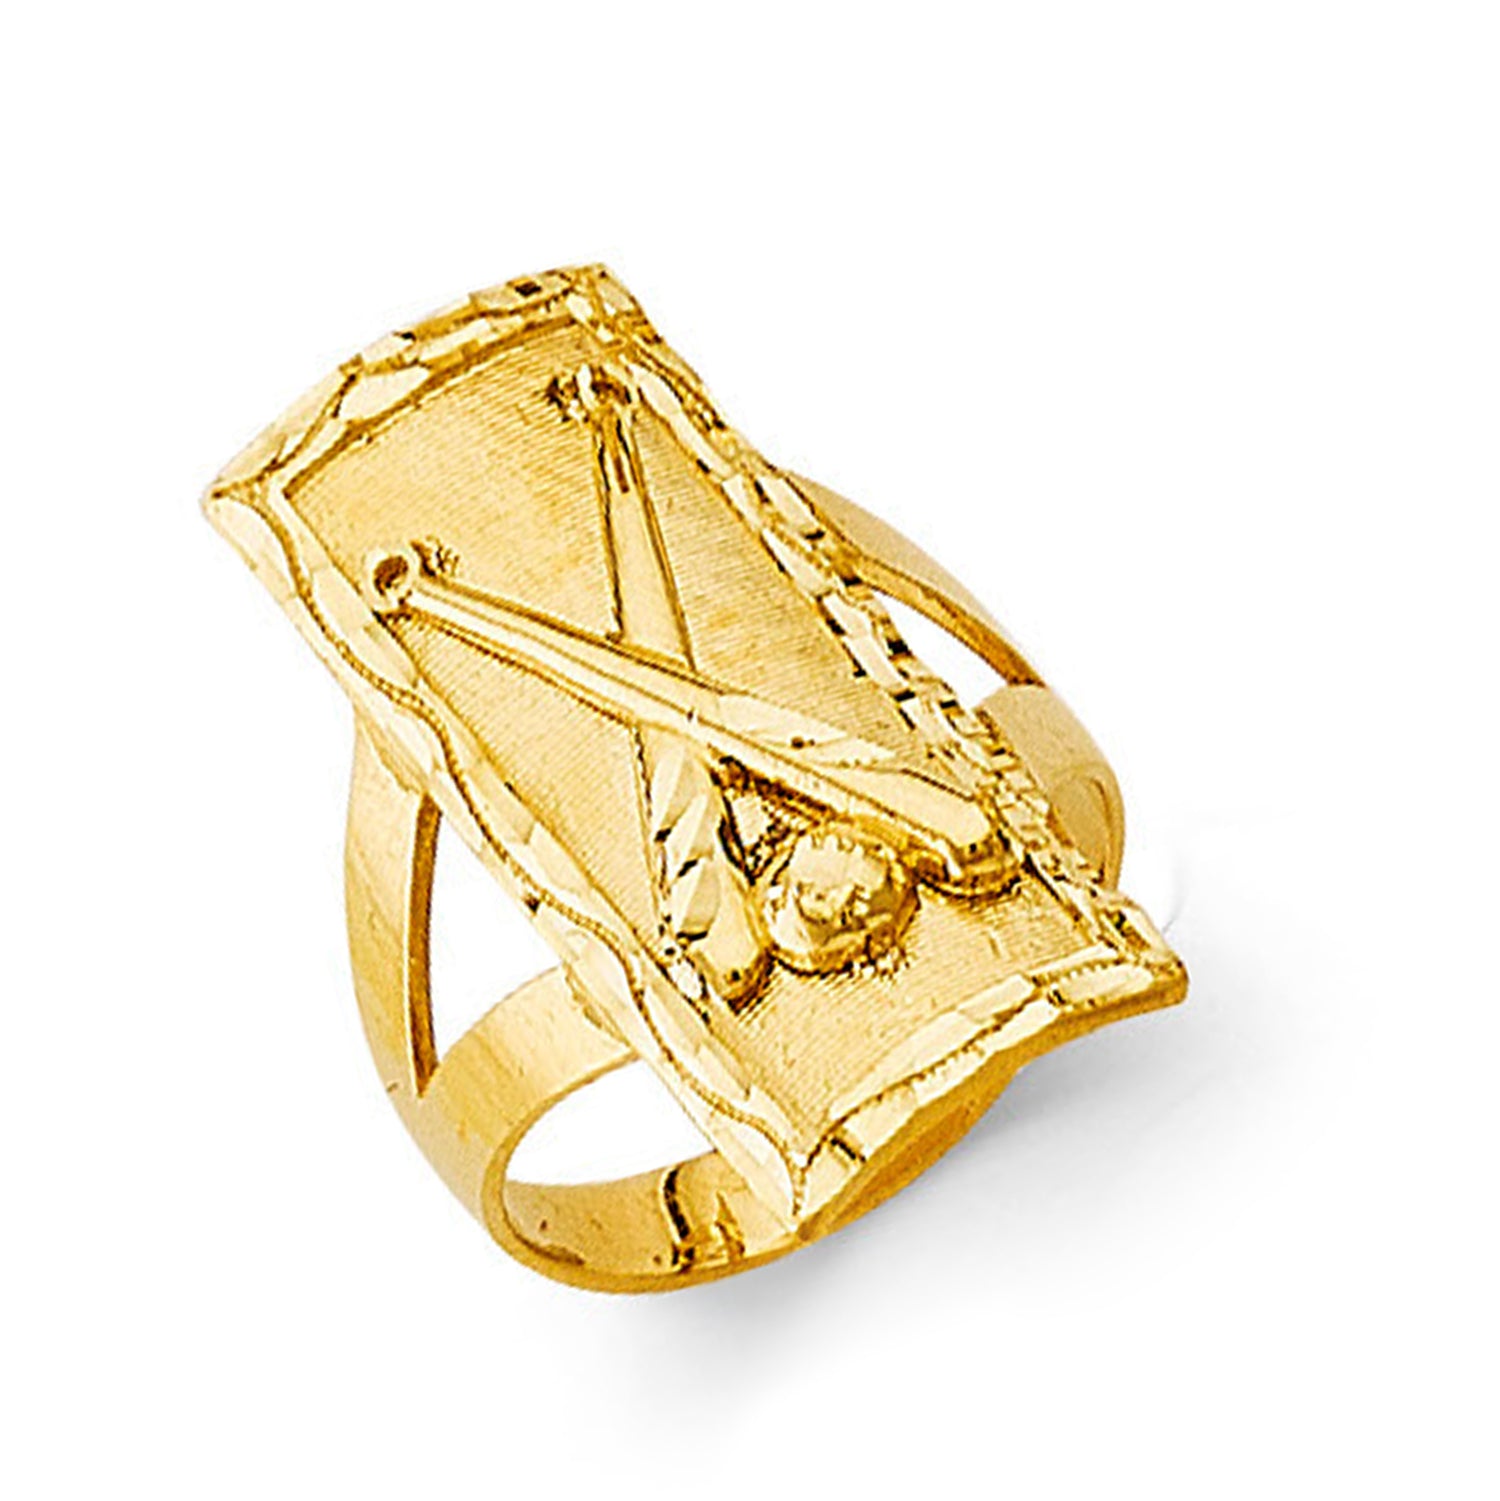 Radiant Religious Bold Casting Ring in Solid Gold 